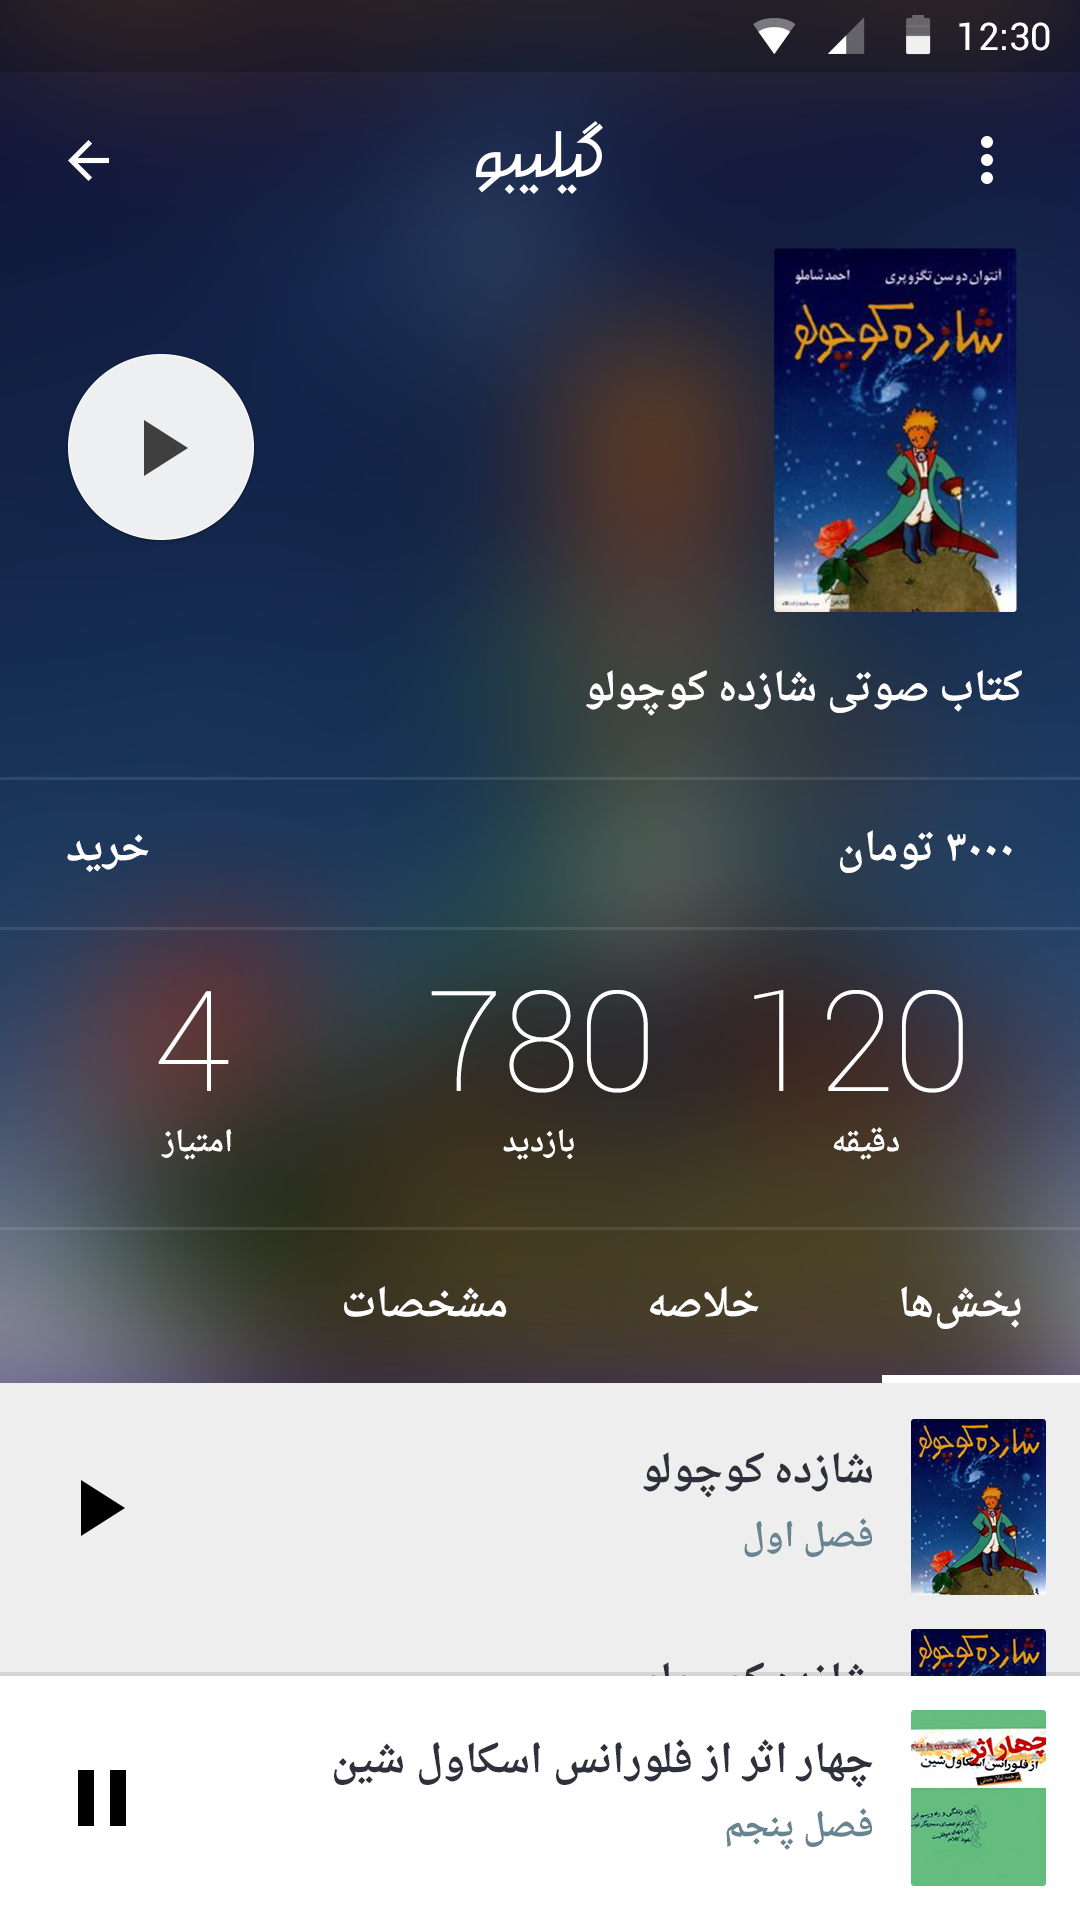 Gilibo for Android by Pouya Saadeghi - /projects/7Uv53PnPJQWRGzaVwpSLj1KC3GqtfIbk.png